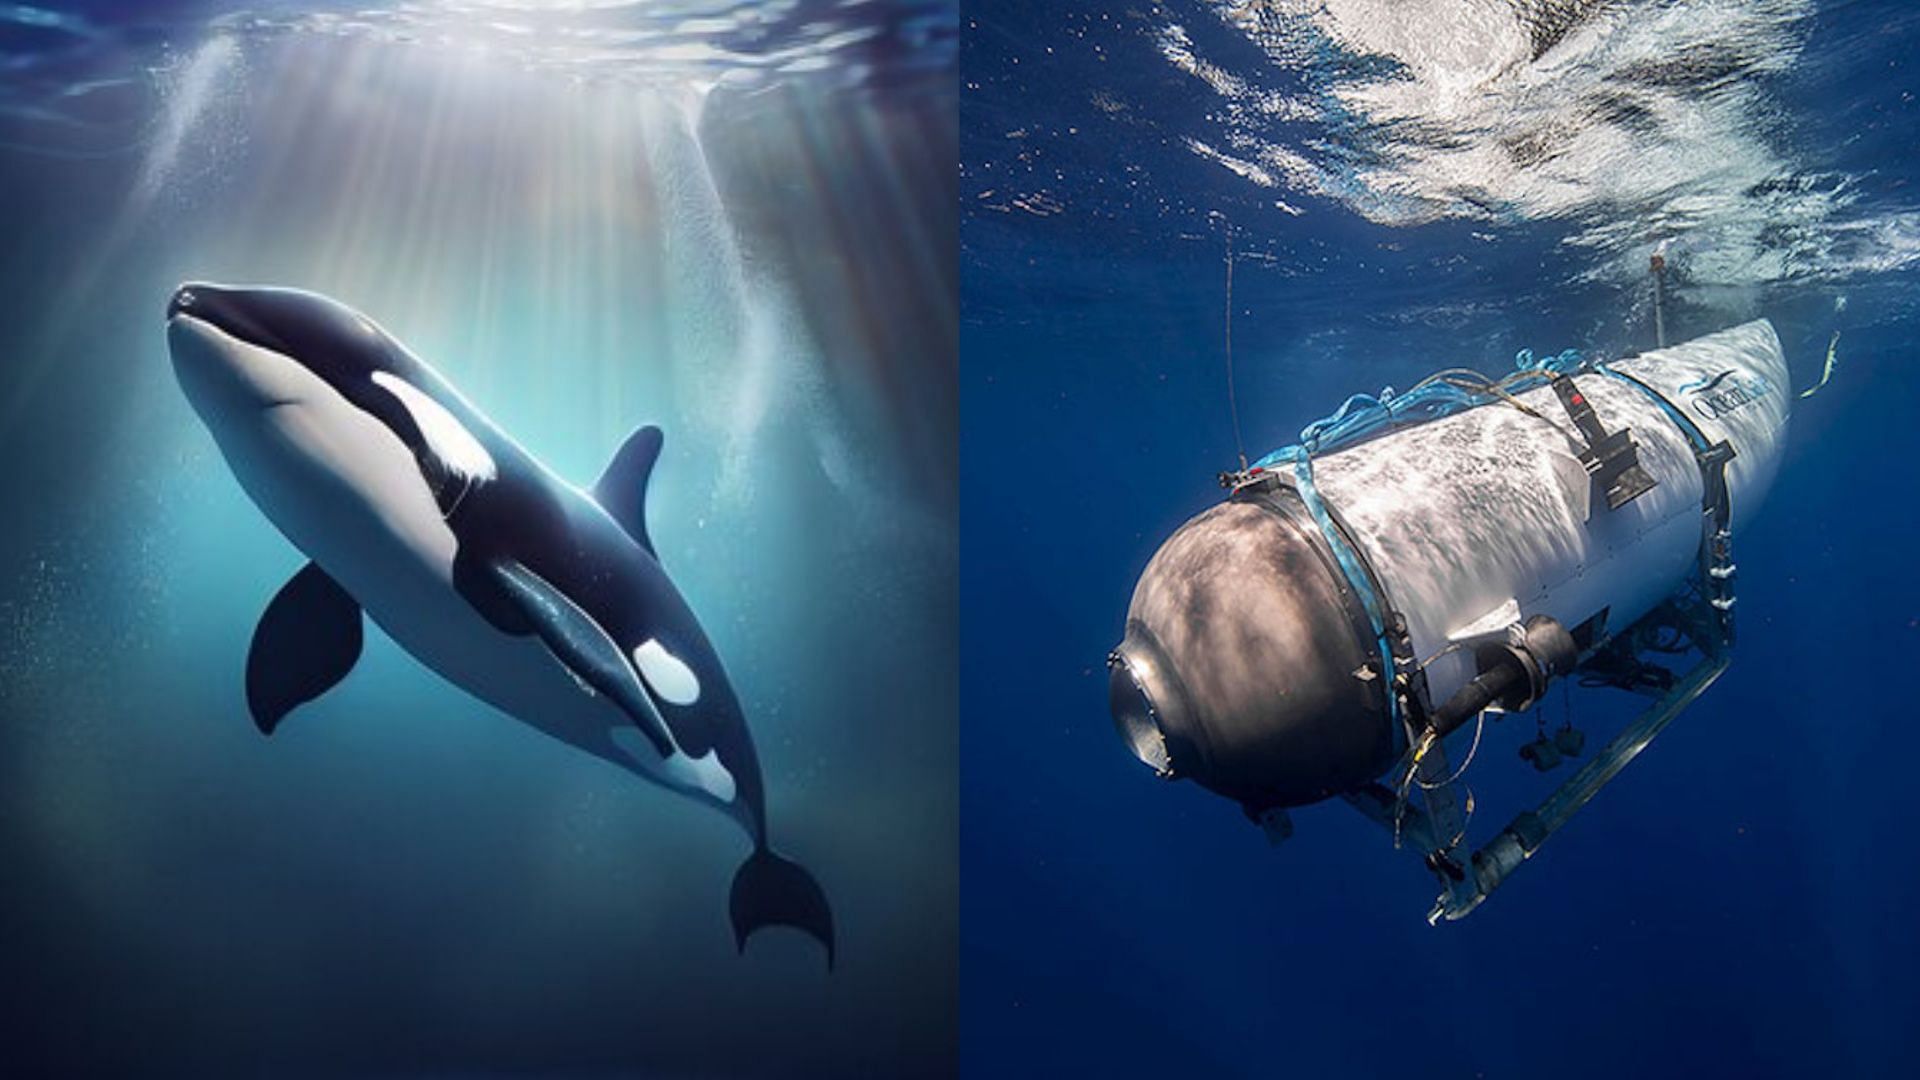 Experts debunk social media theory about Killer Whales being responsible for the missing Titan submersible. (Image via Adobe Stock, OceanGate)